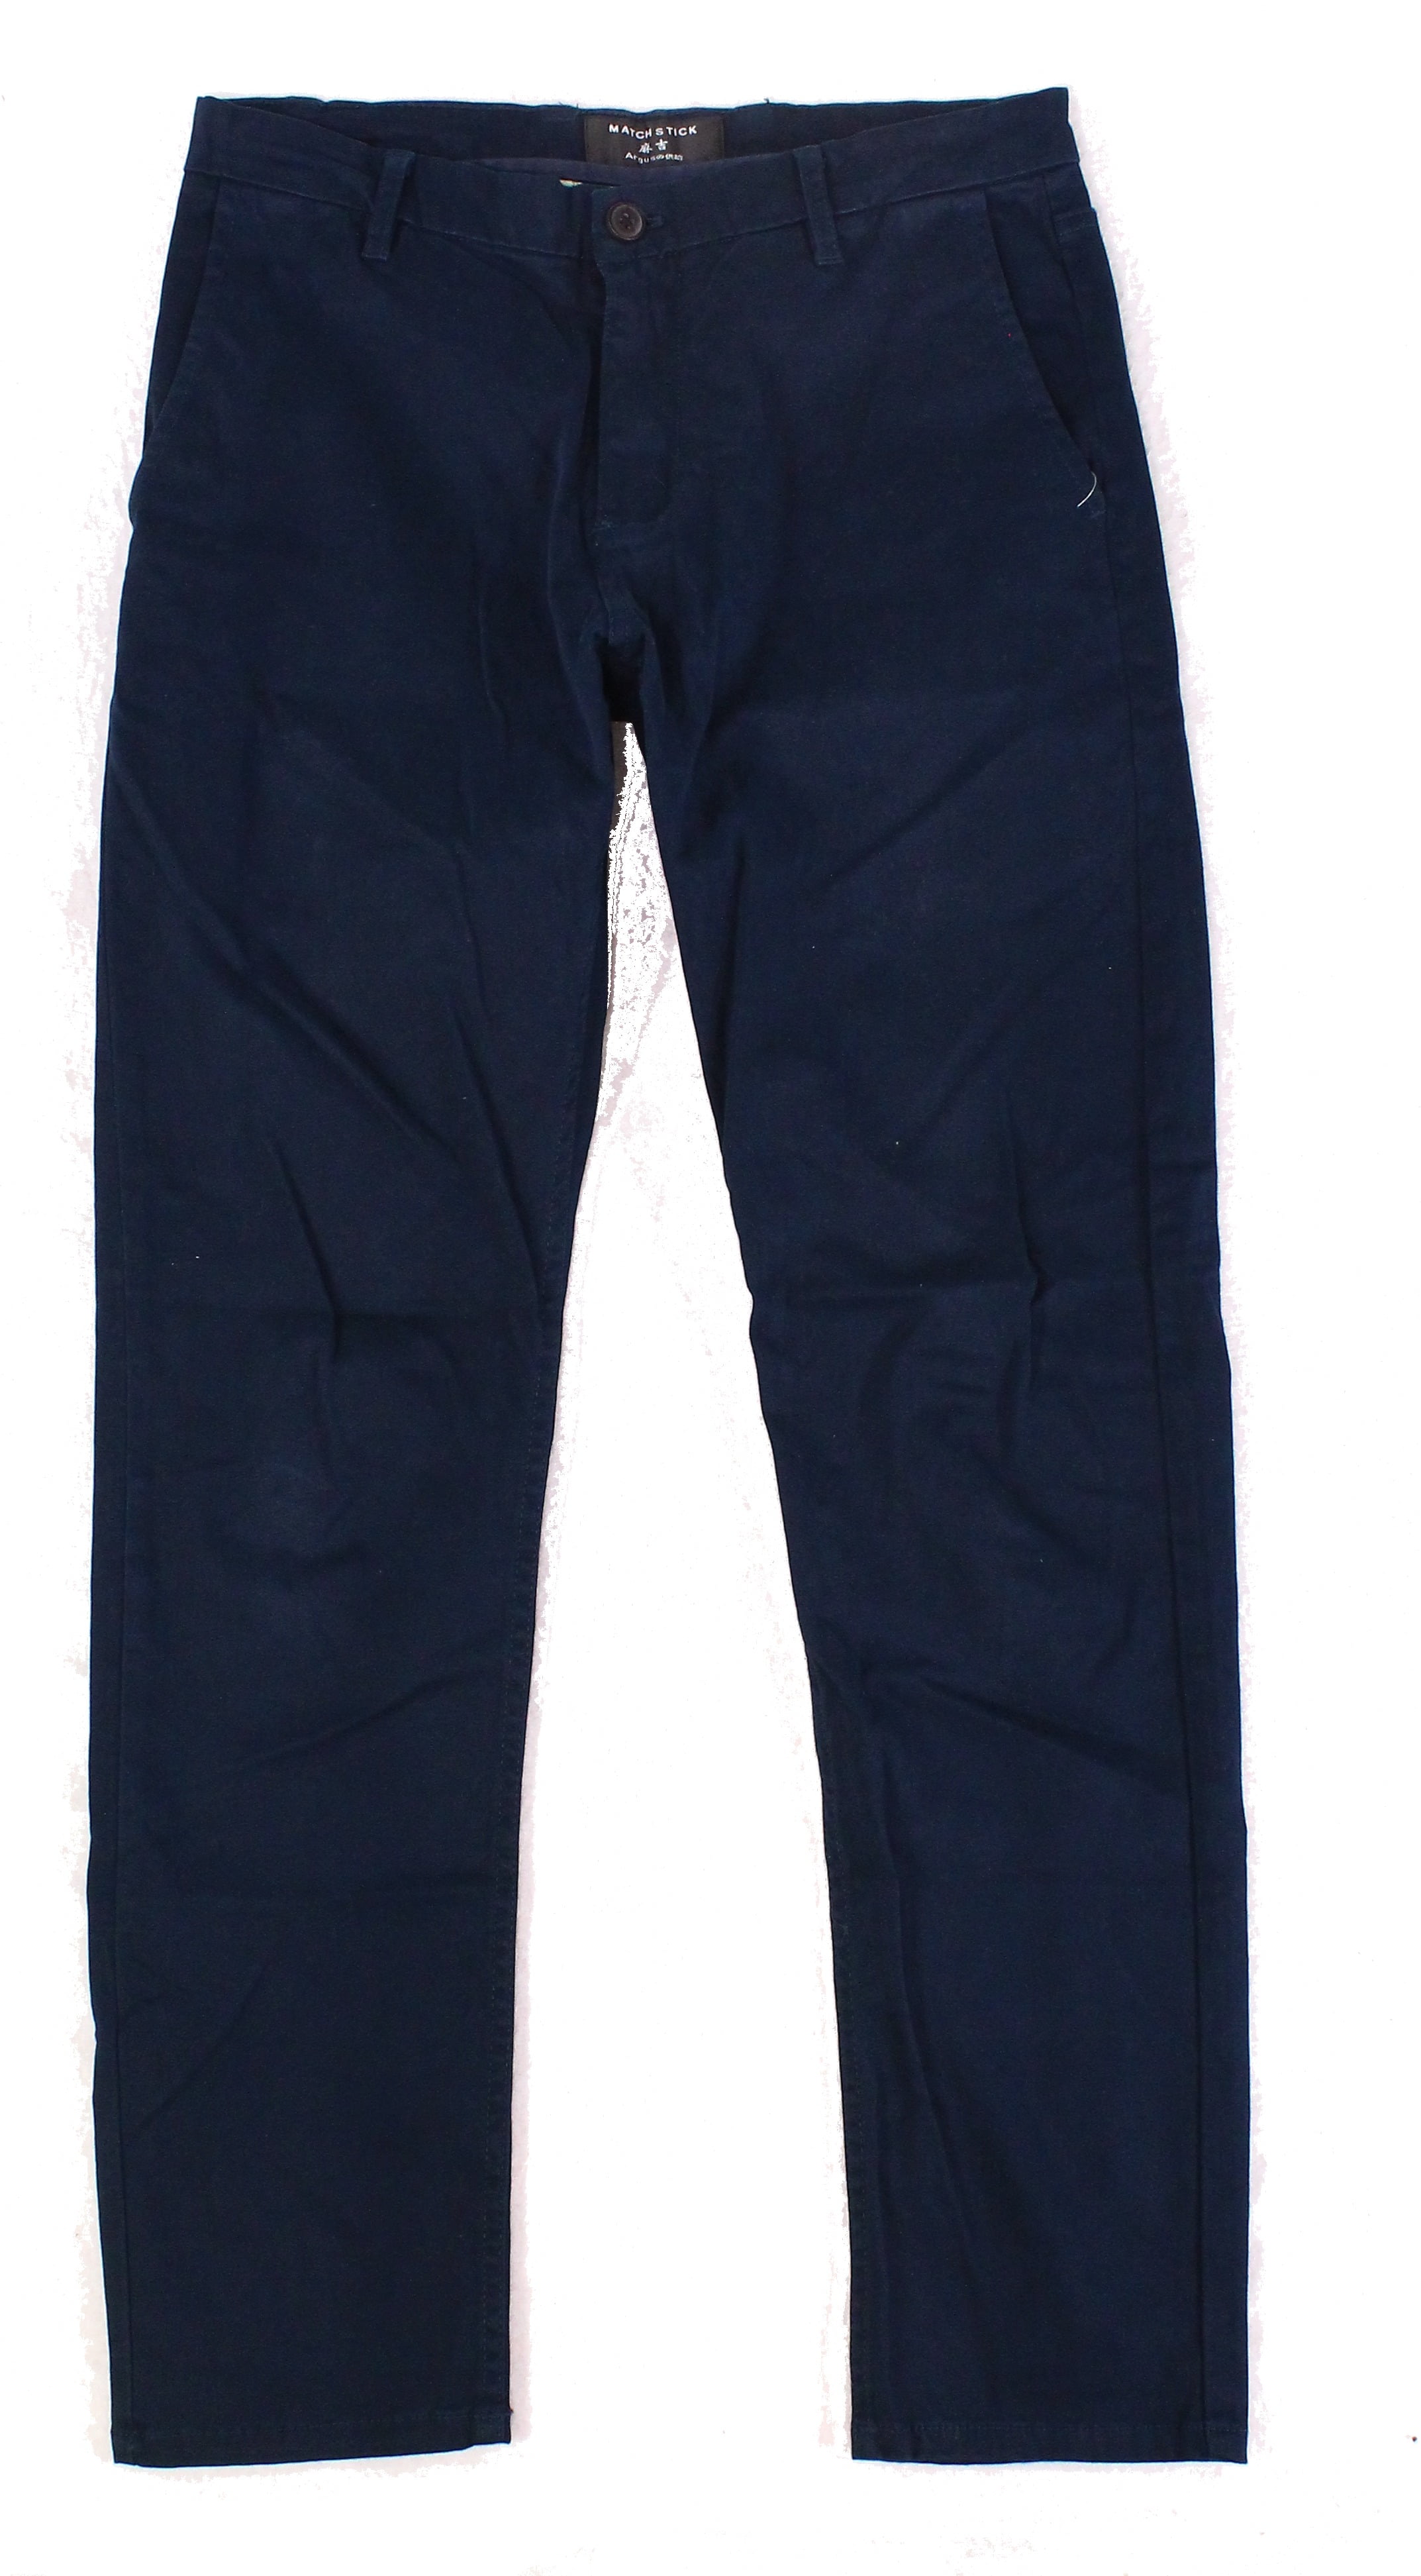 Match Stick Pants - Mens Pants Navy Small Tapered Relax Fitted S ...